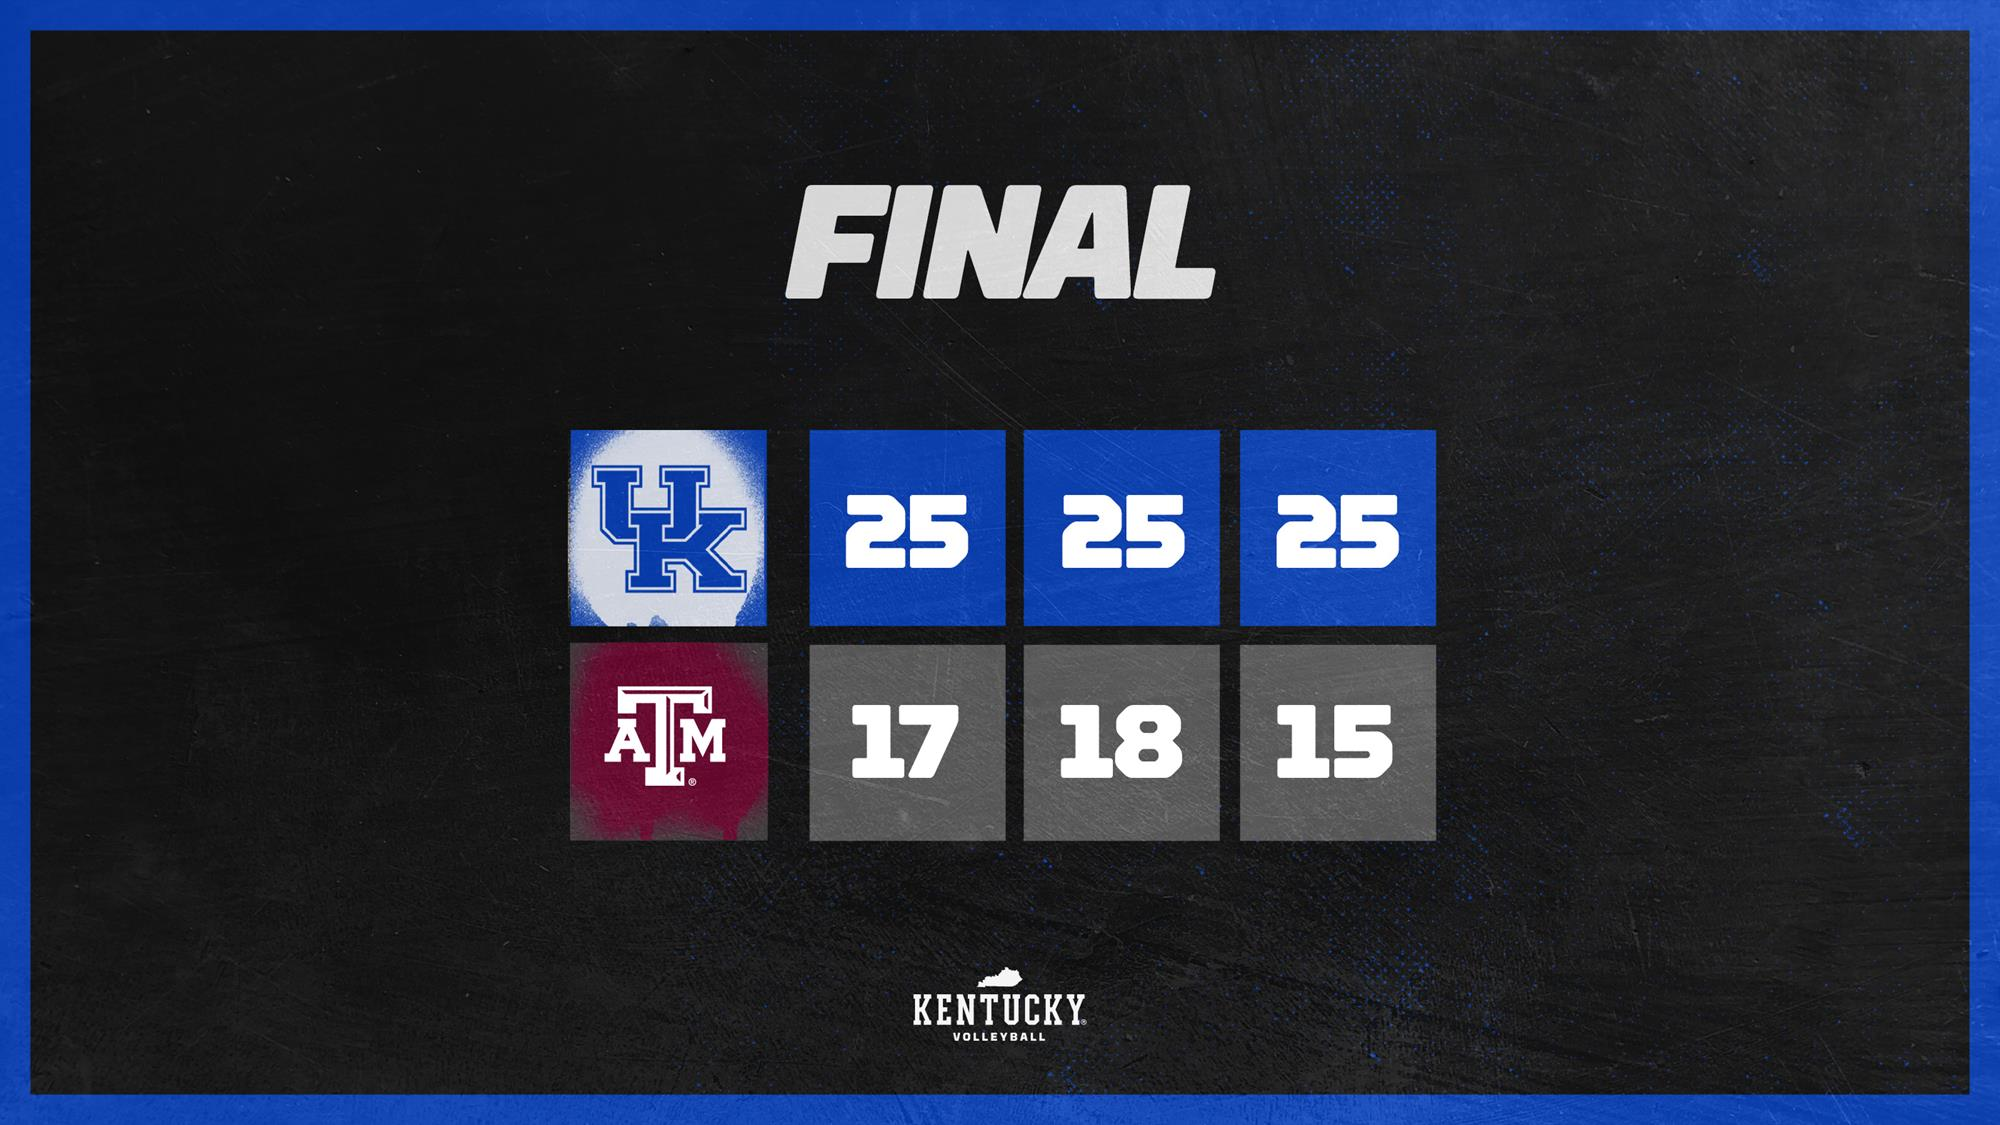 Kentucky’s 13 Aces Overpower Texas A&M in 3-0 Saturday Sweep